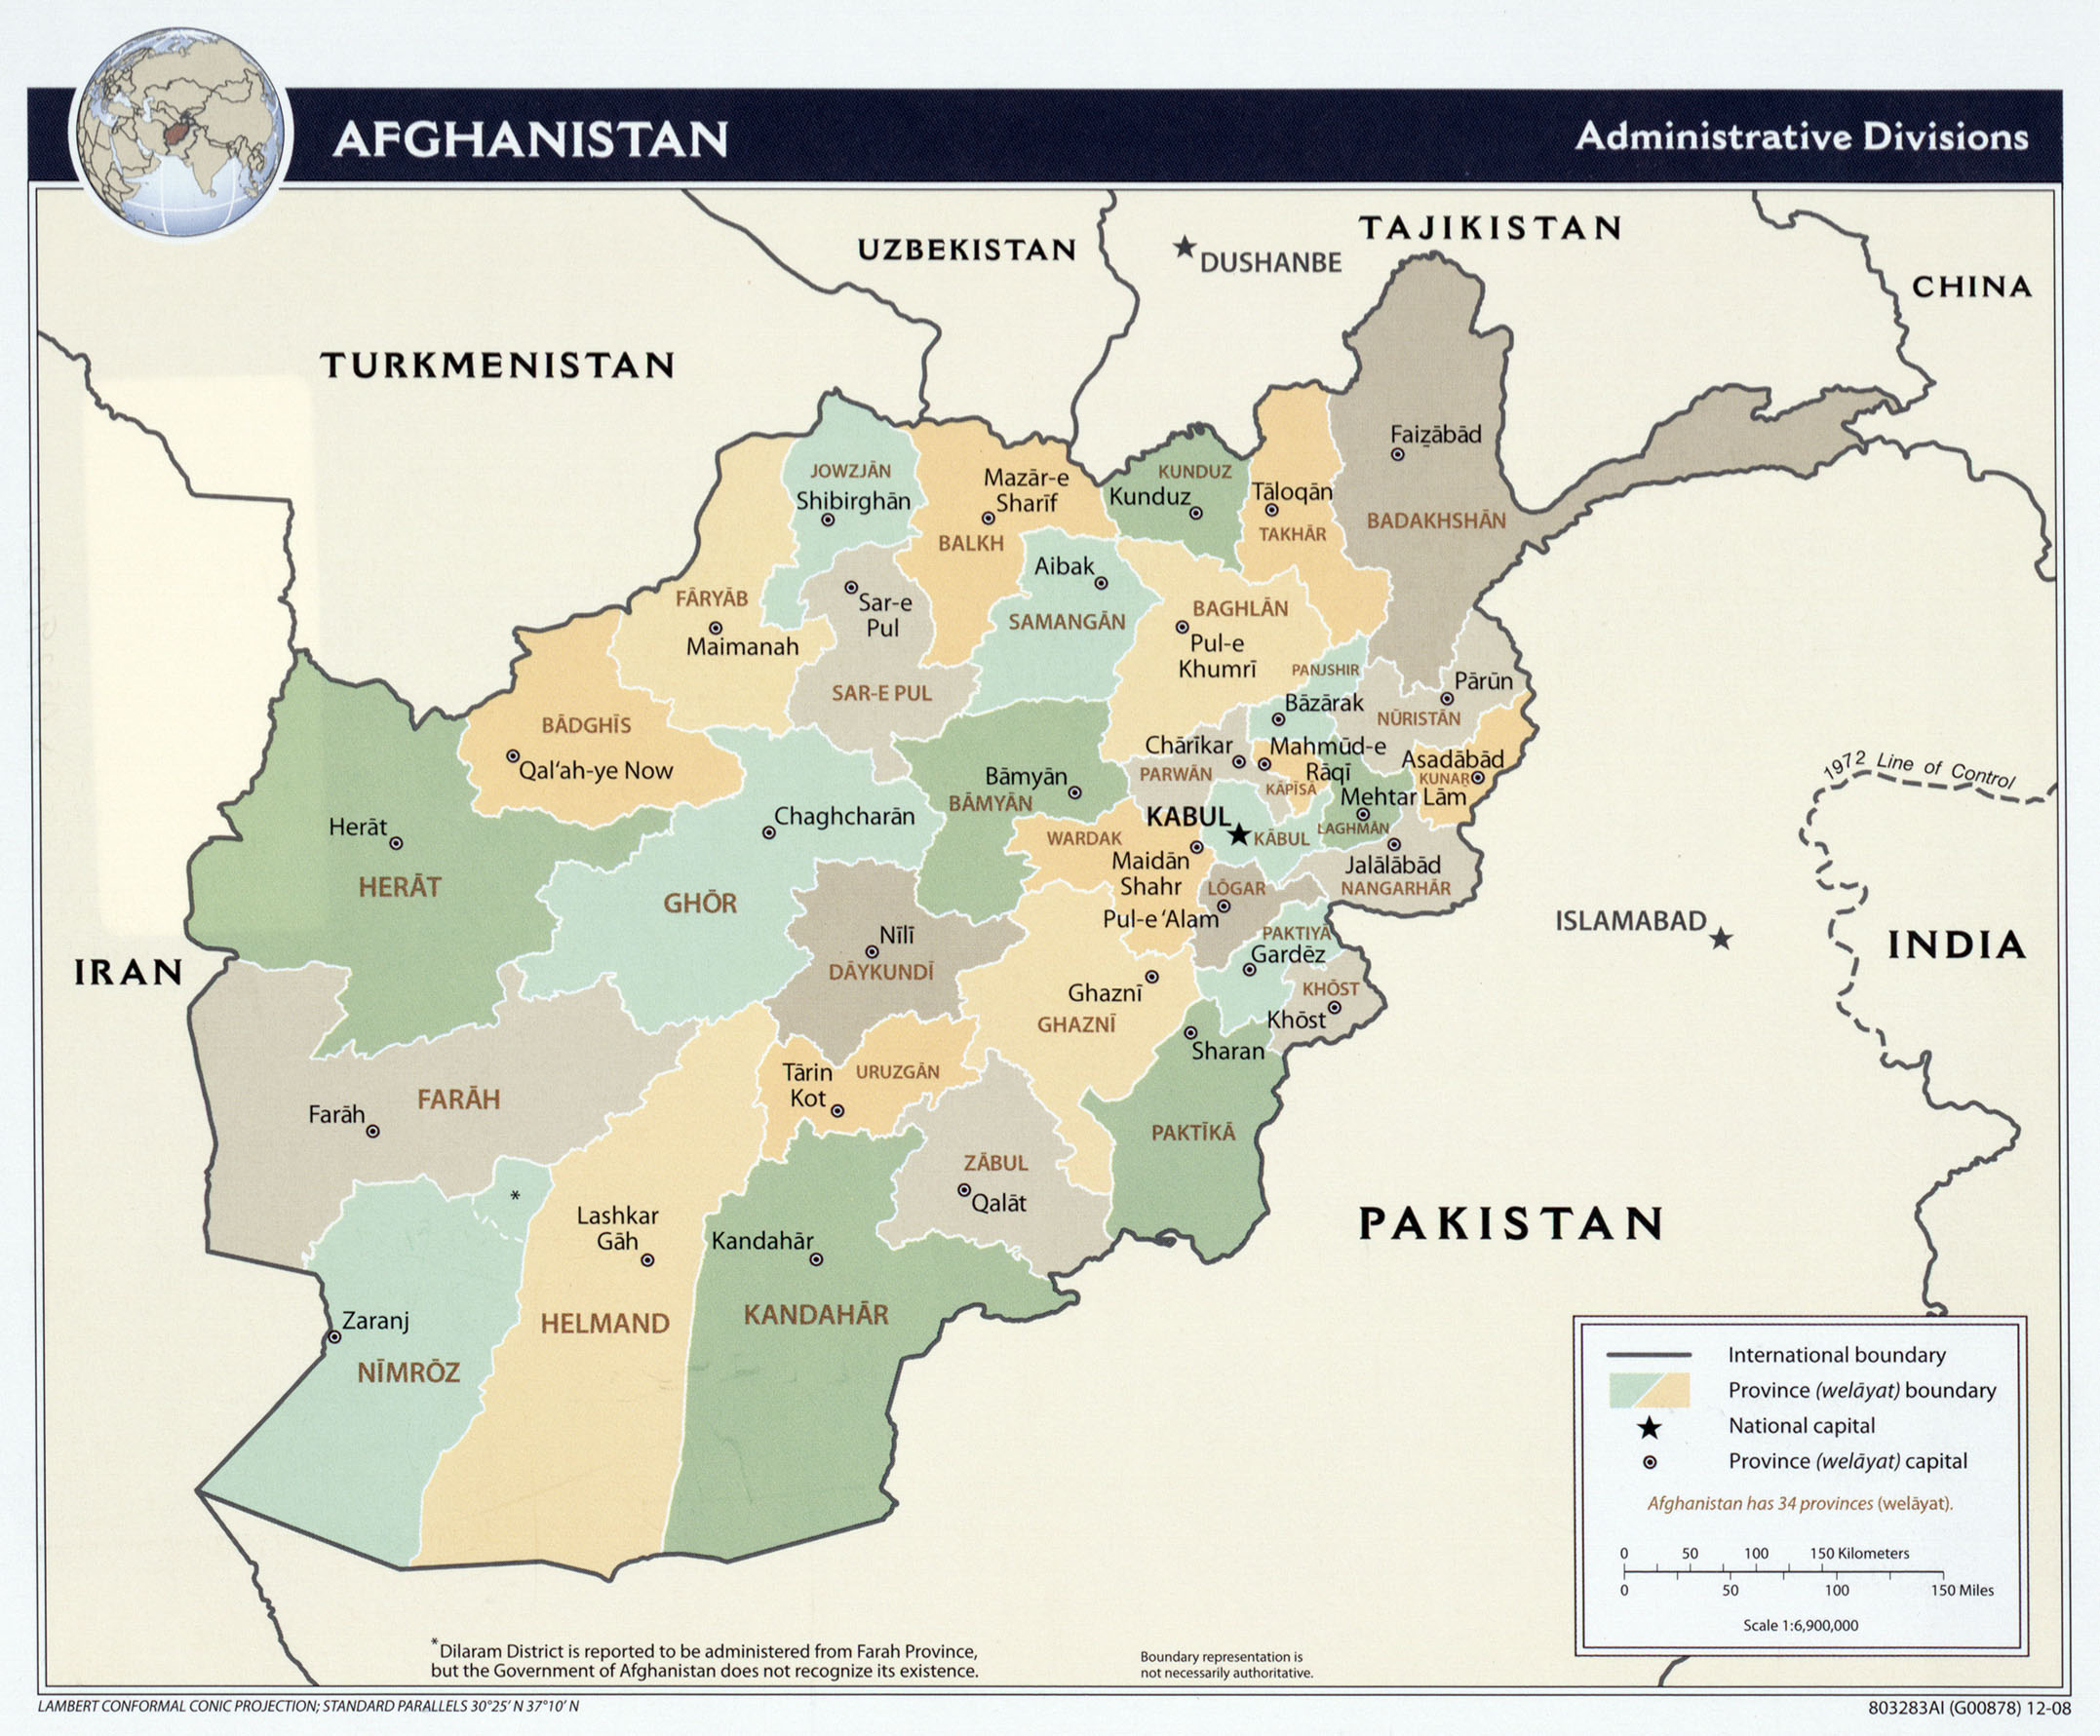 Delivery of cargo to Afghanistan